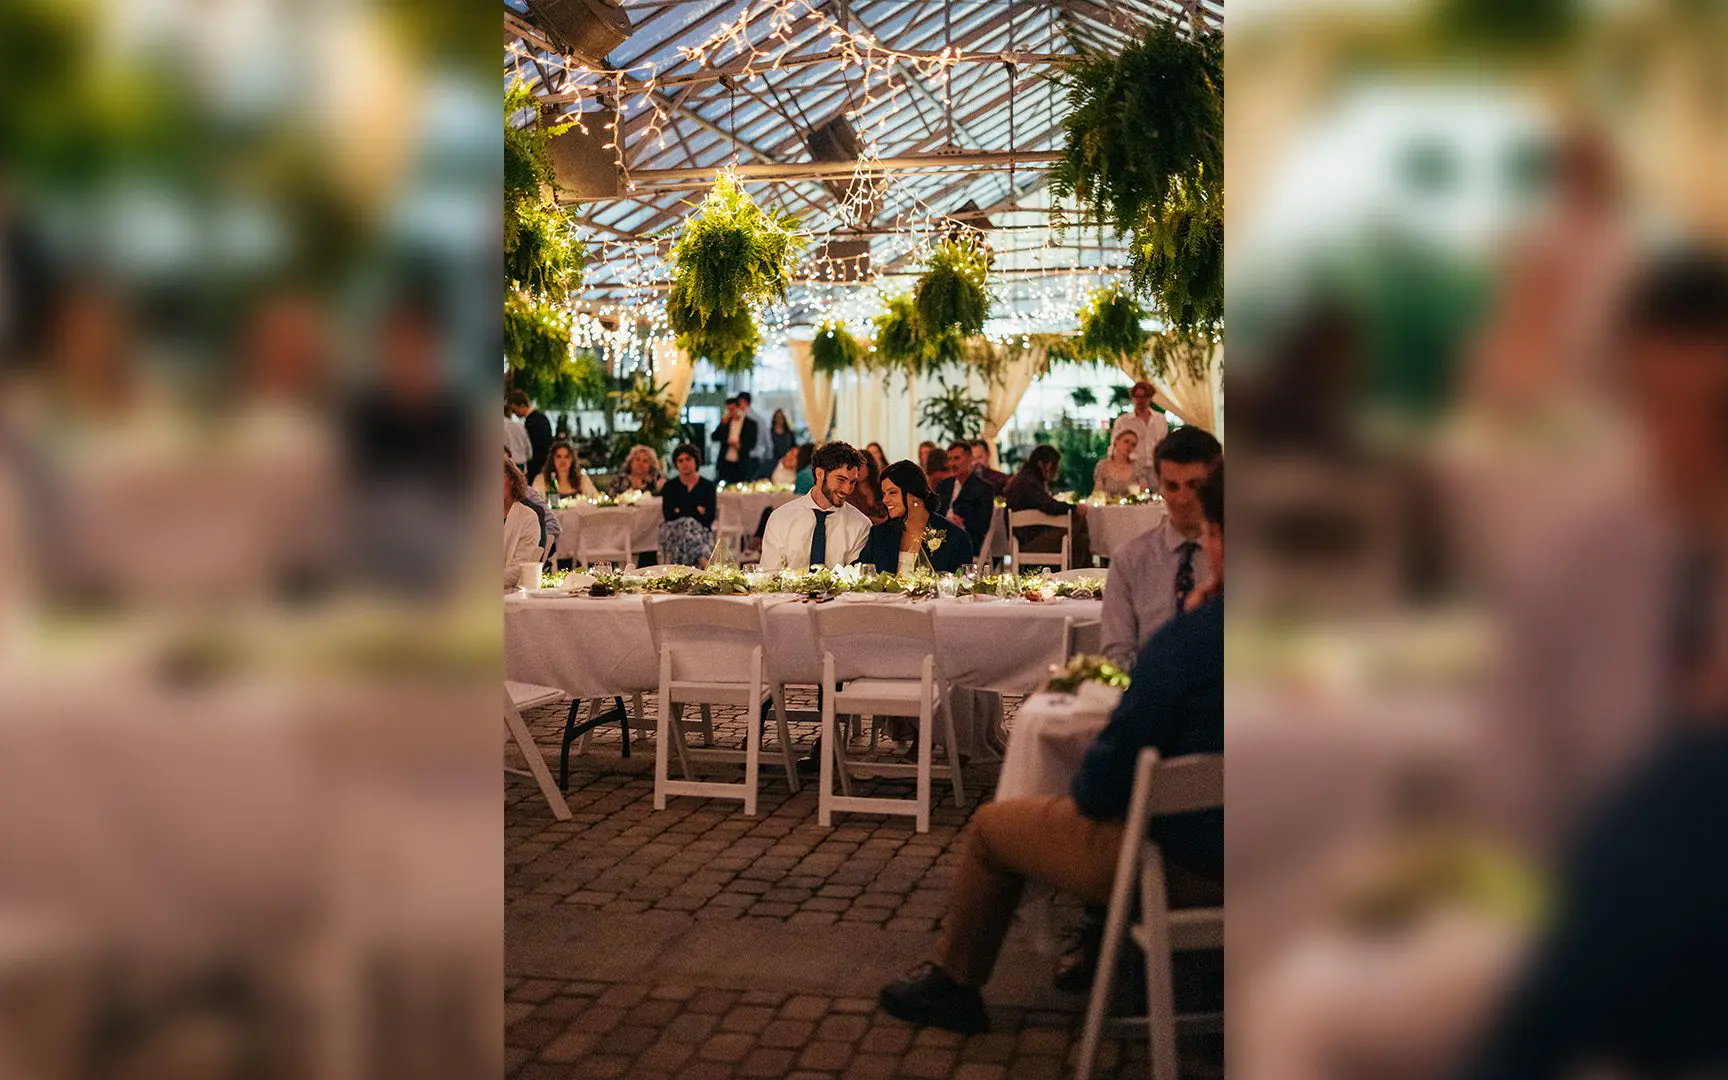 Guests seated at decorated tables during an evening event in a greenhouse with hanging plants and lights.